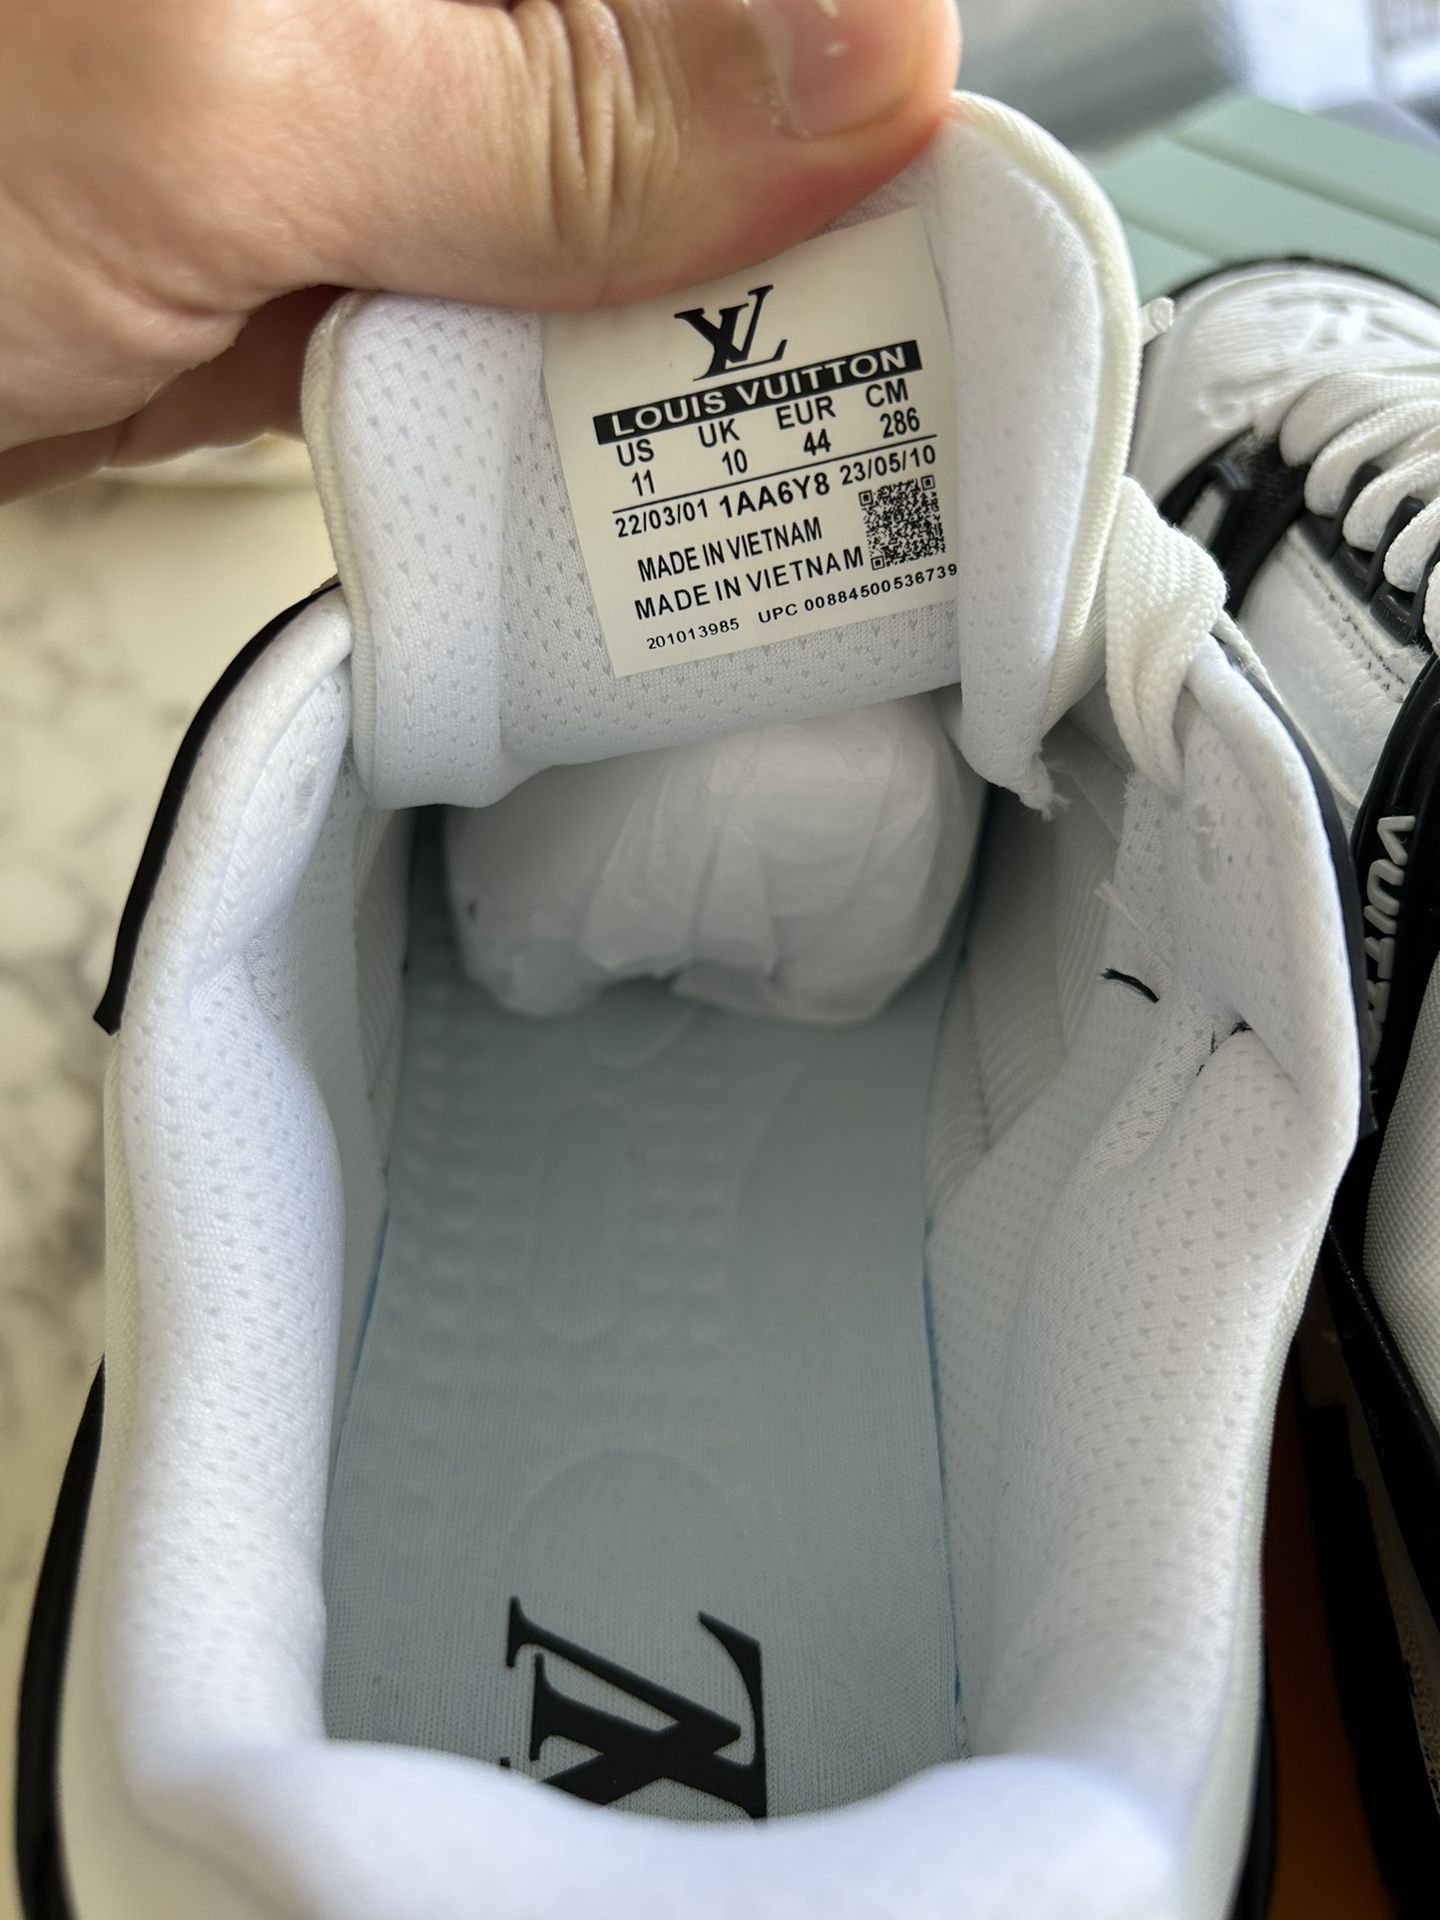 Louis Vuitton Sneakers for Sale in Champions Gt, FL - OfferUp